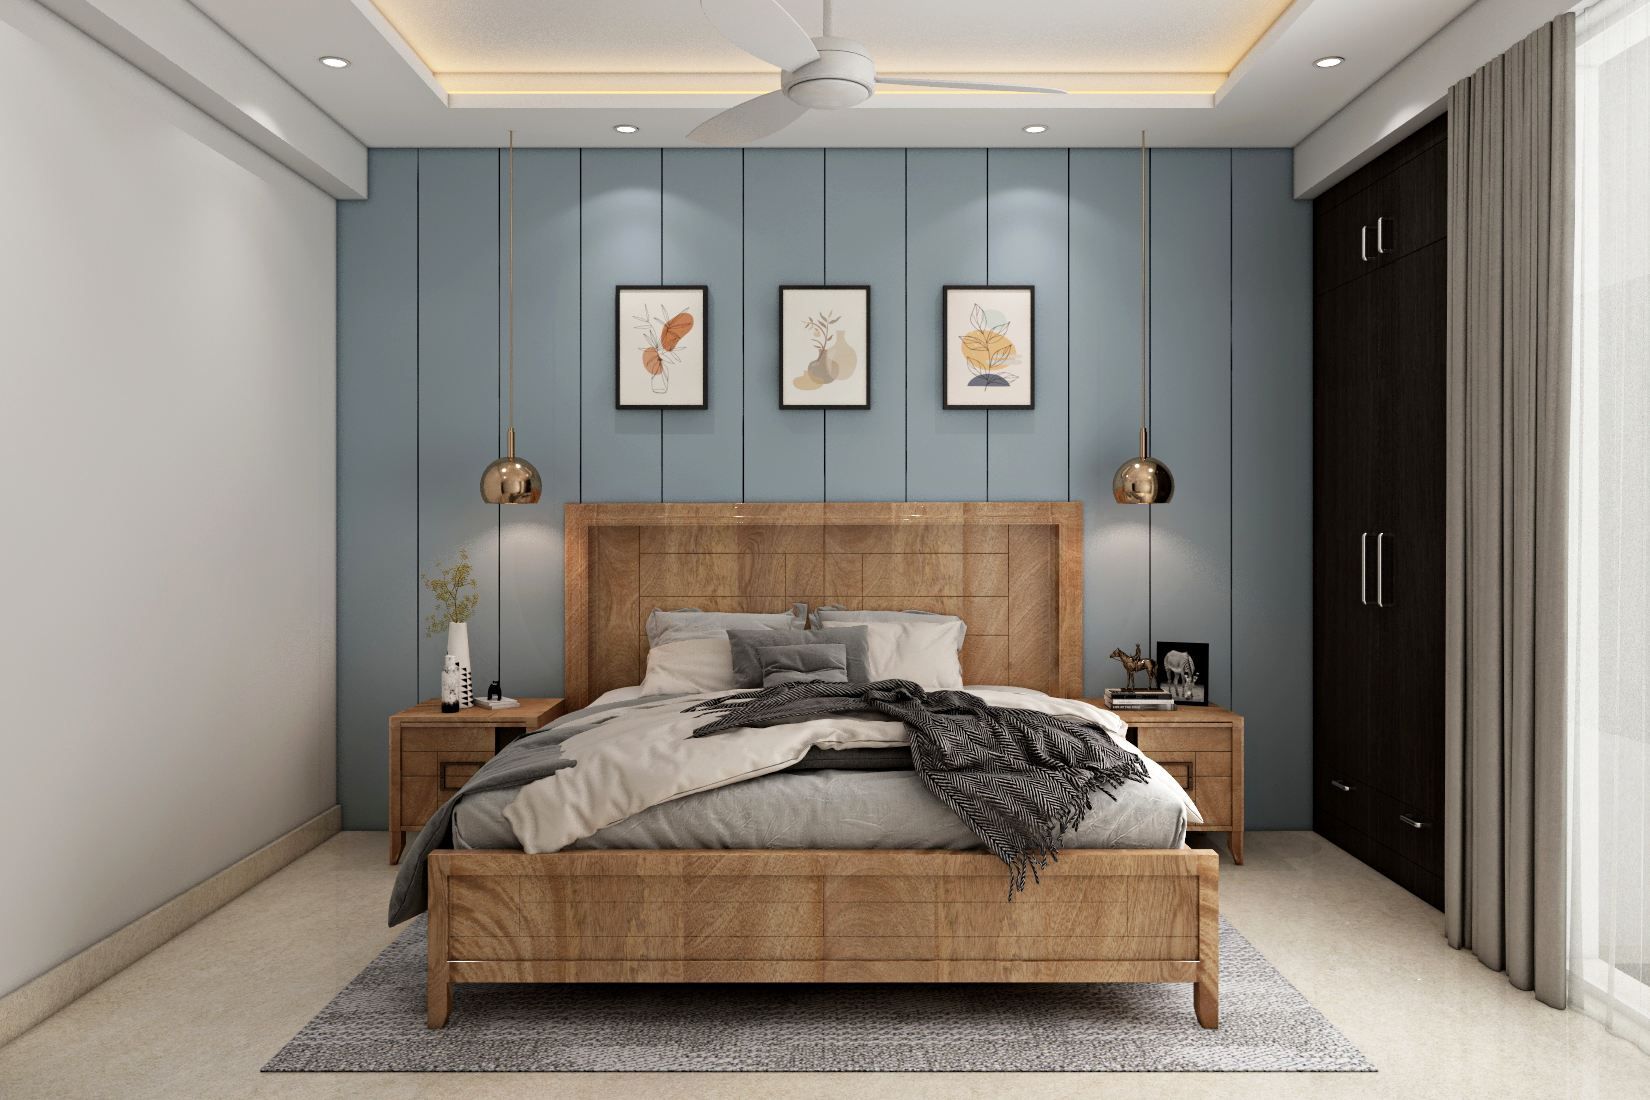 Modern Spacious Master Bedroom Design With Blue Panelled Accent Wall